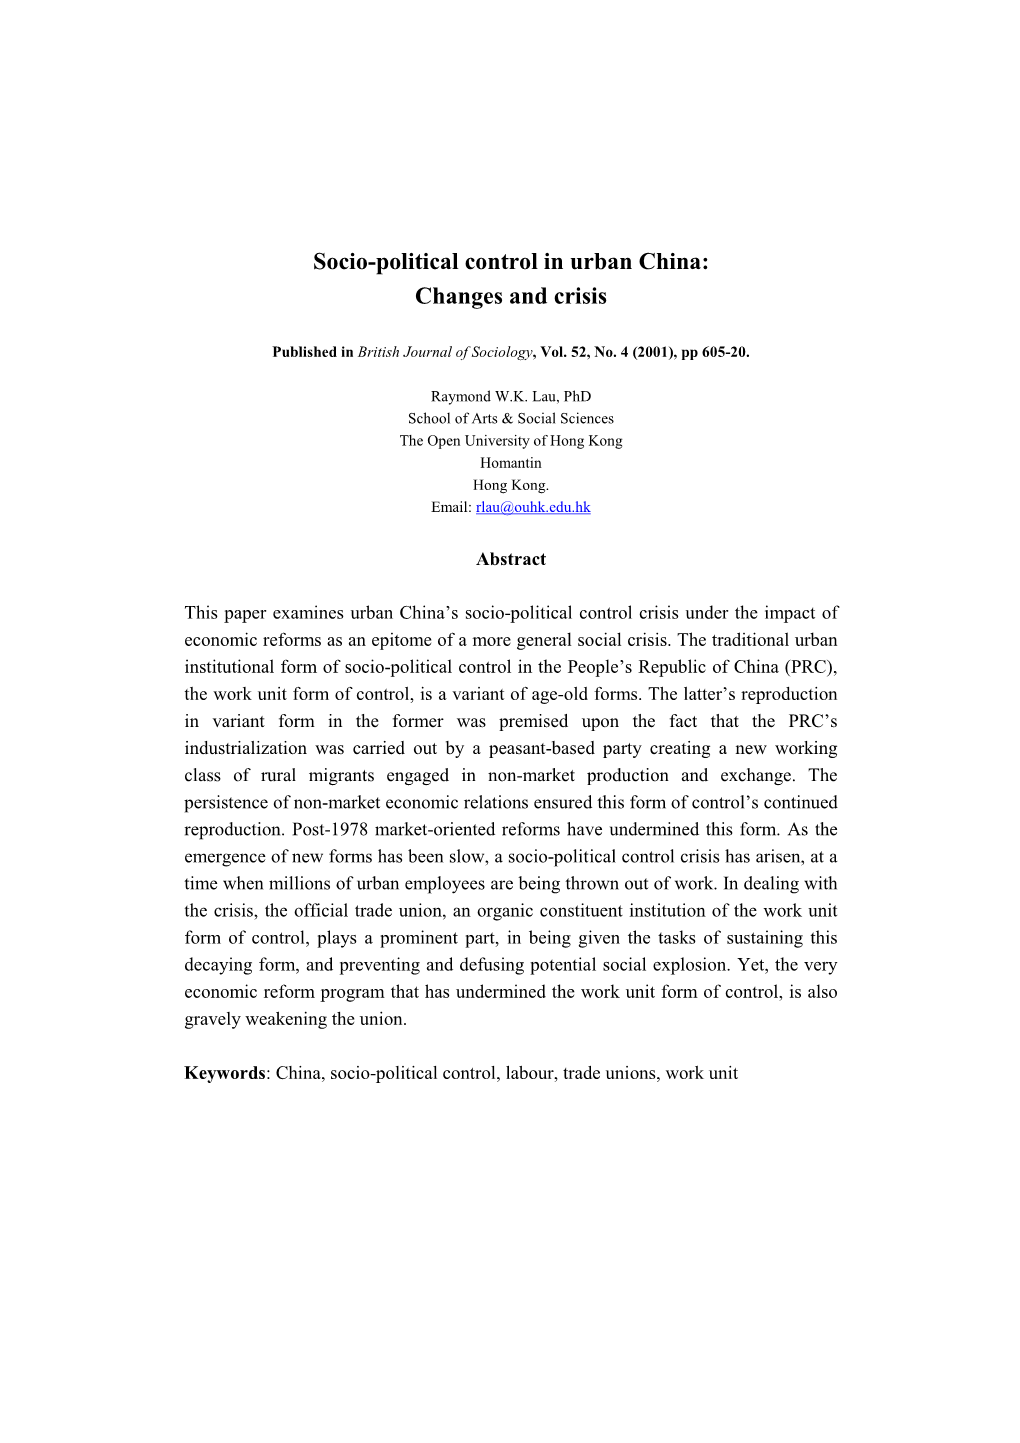 Socio-Political Control in Urban China: Changes and Crisis